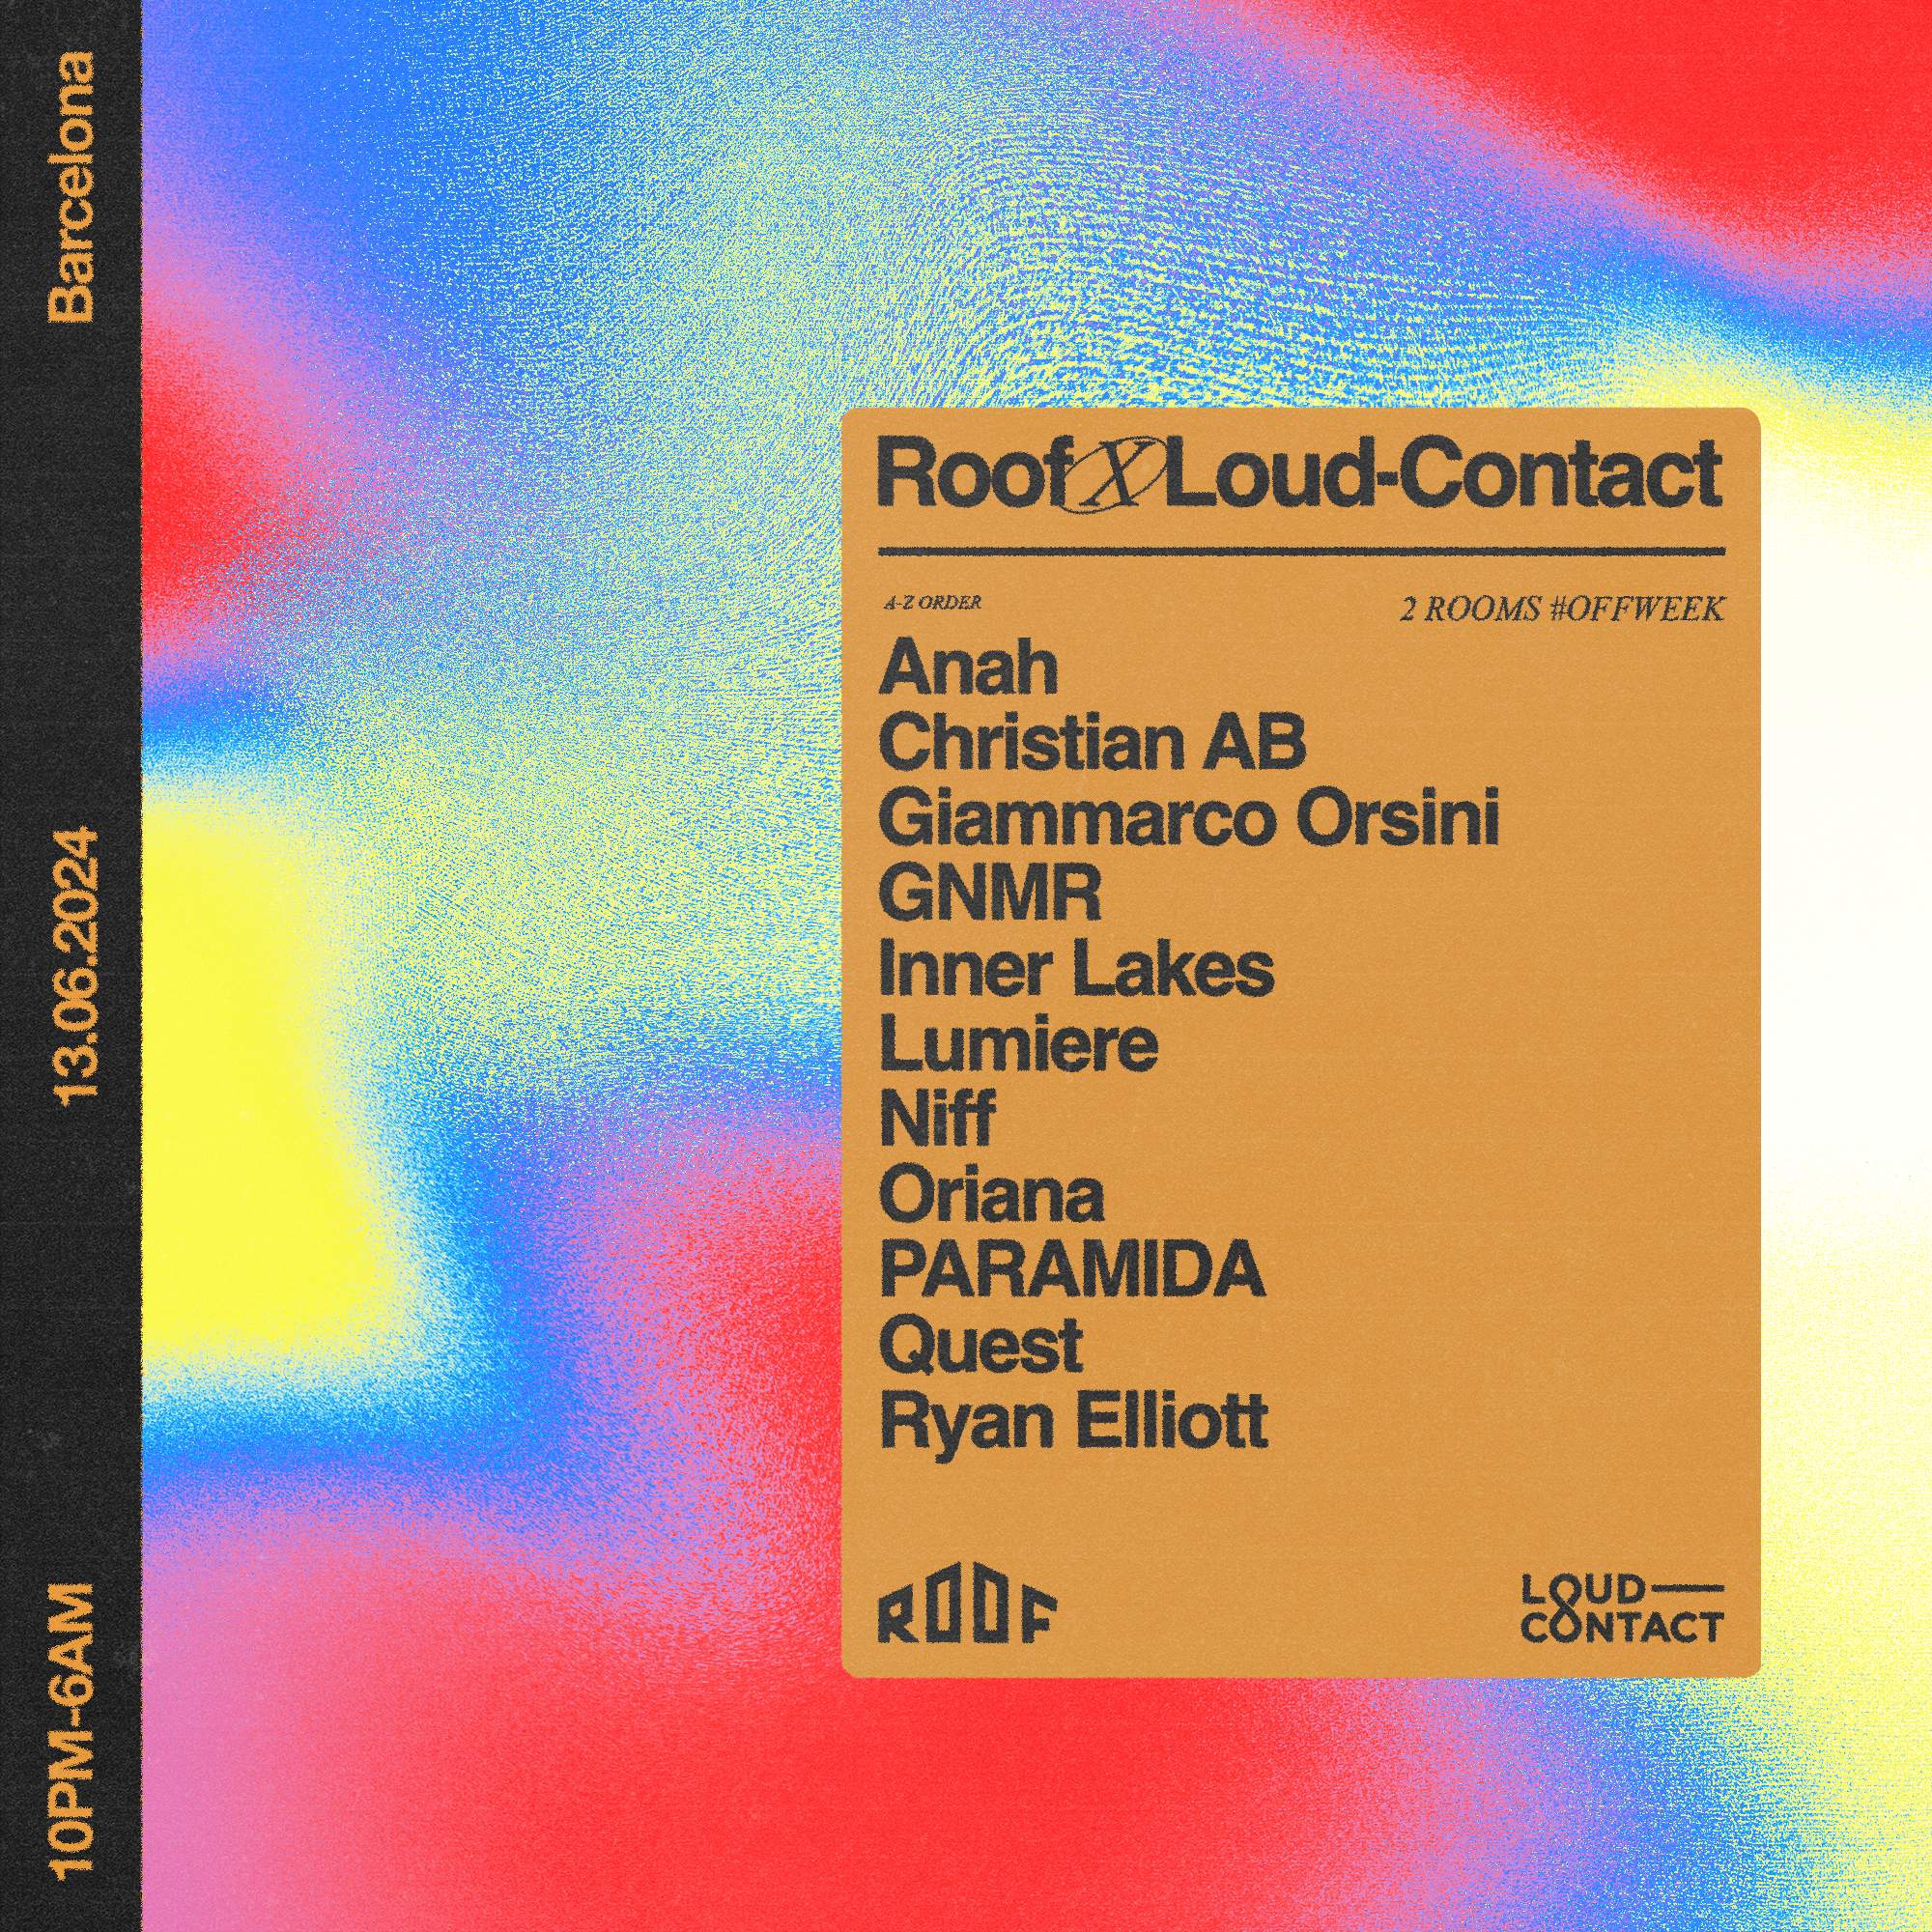 Roof x Loud-Contact - Off Week - フライヤー裏